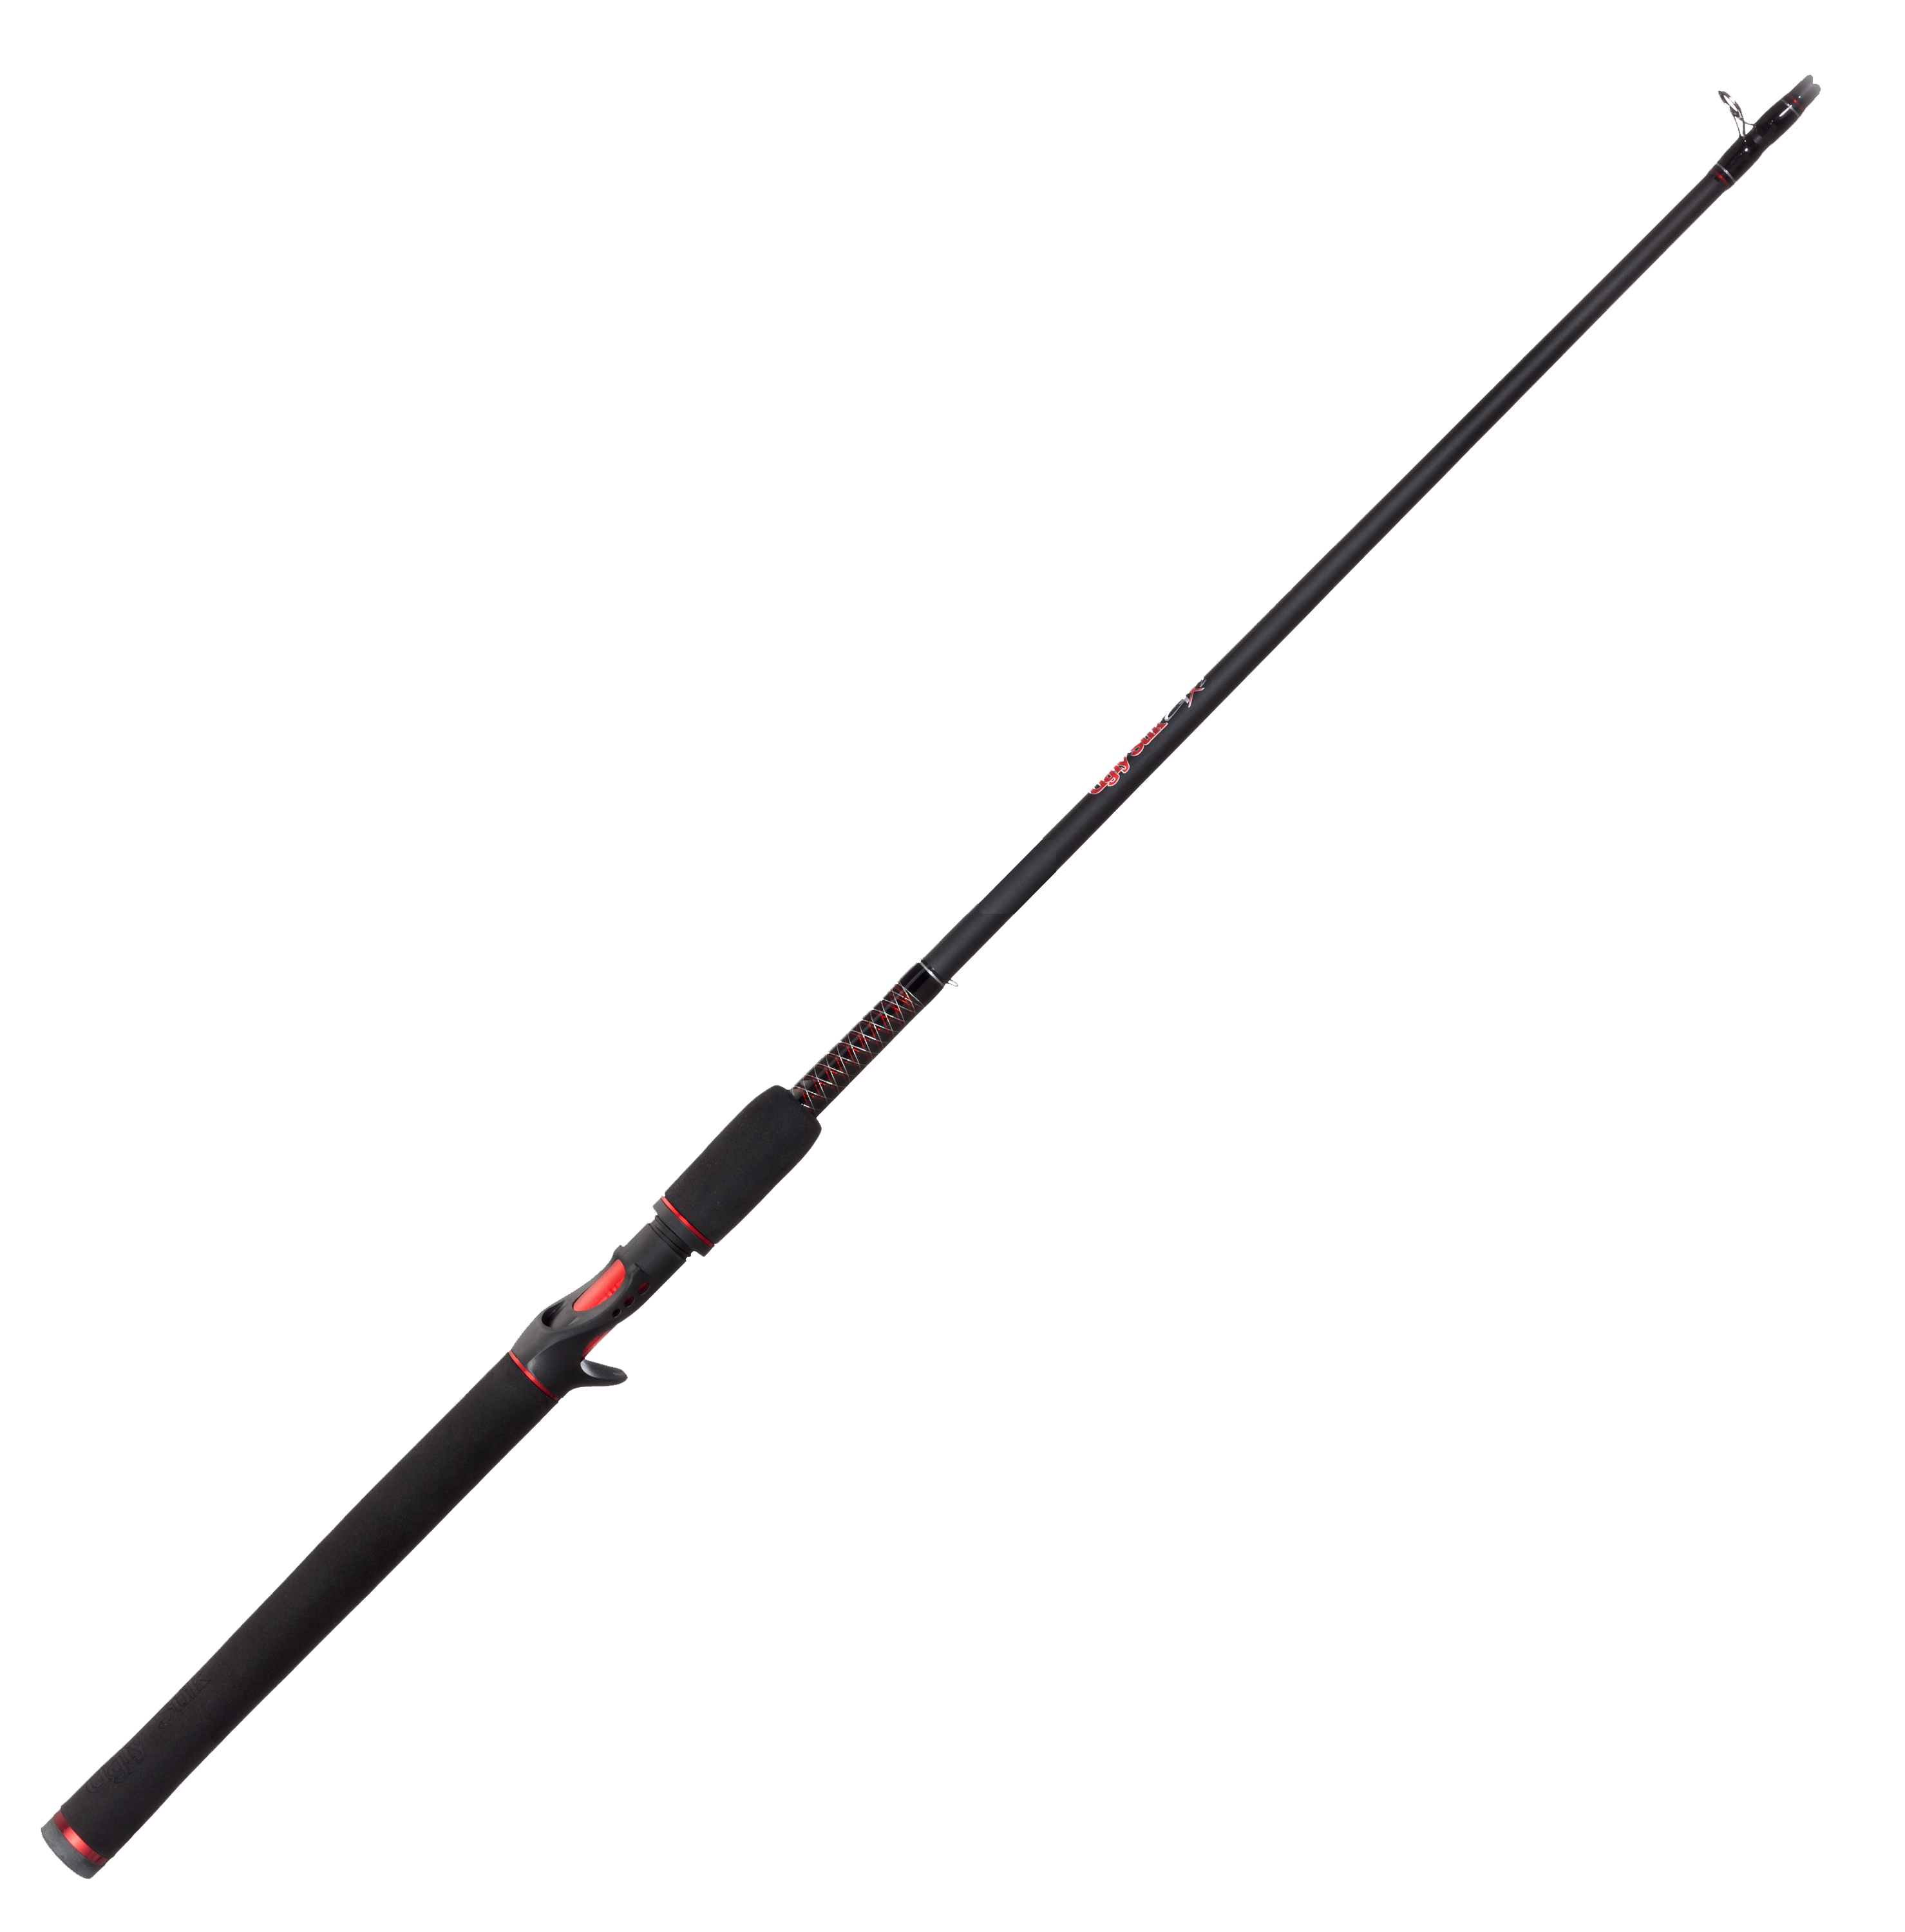 Ugly Stik GX2 Spinning Rod and Reel Combo - 6'6 Medium 2 Piece